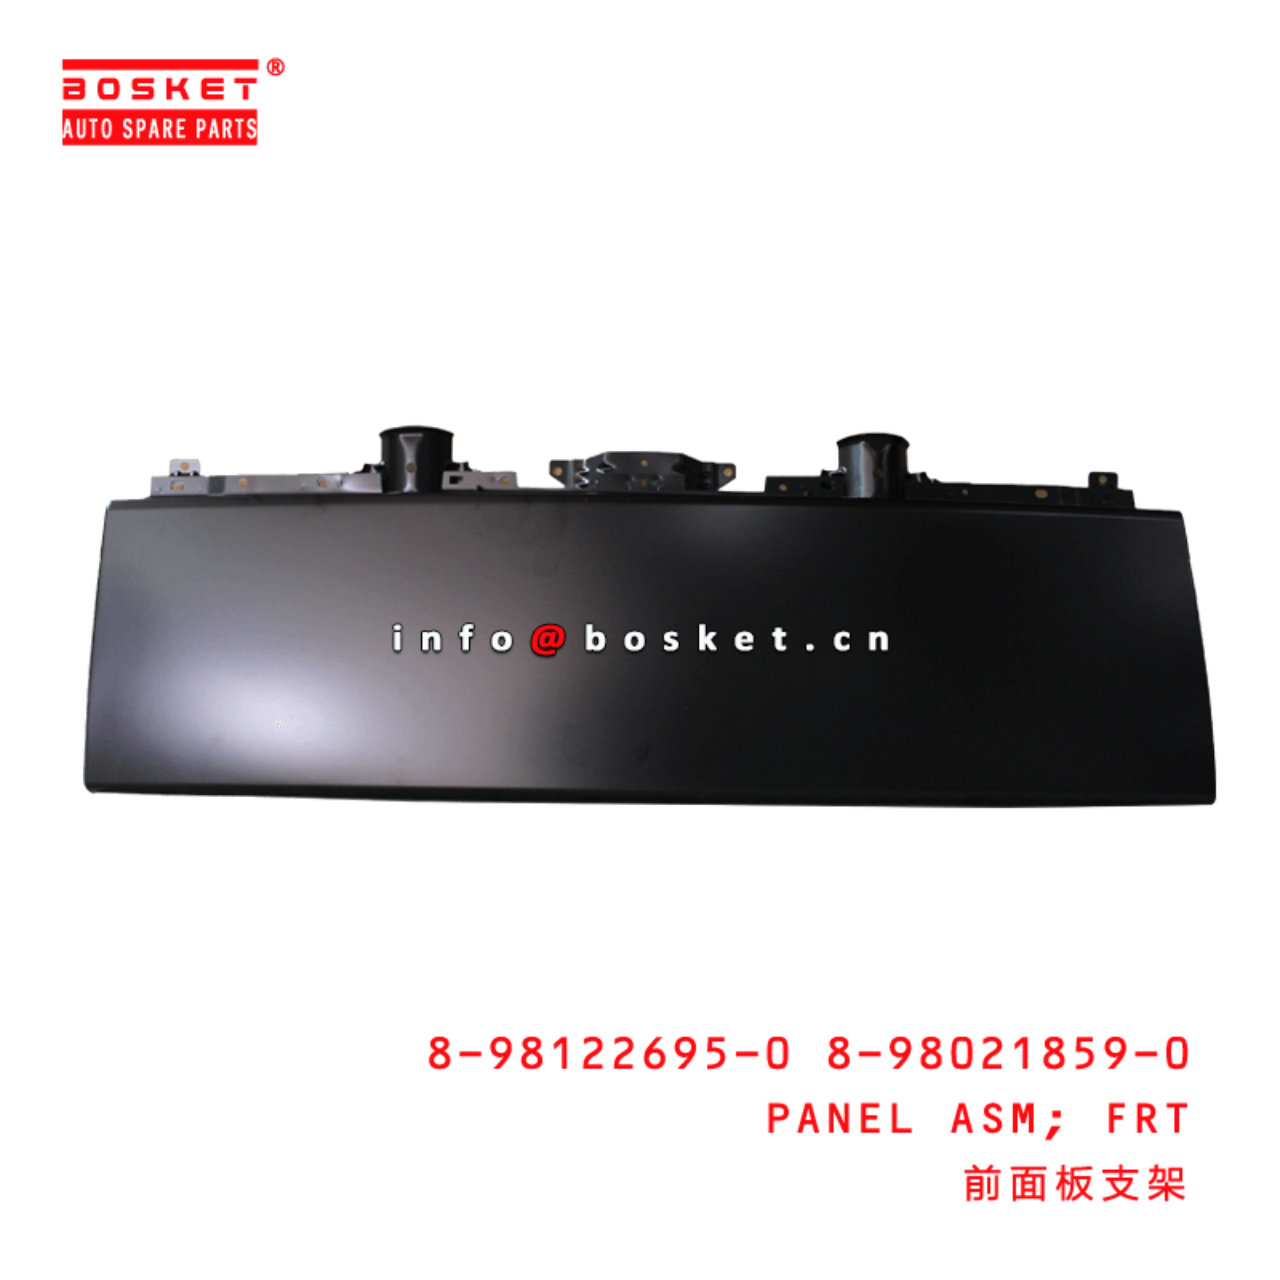 8-98122695-0 8-98021859-0 Front Panel Assembly 8981226950 8980218590 Suitable for ISUZU NPR75 NLR85 